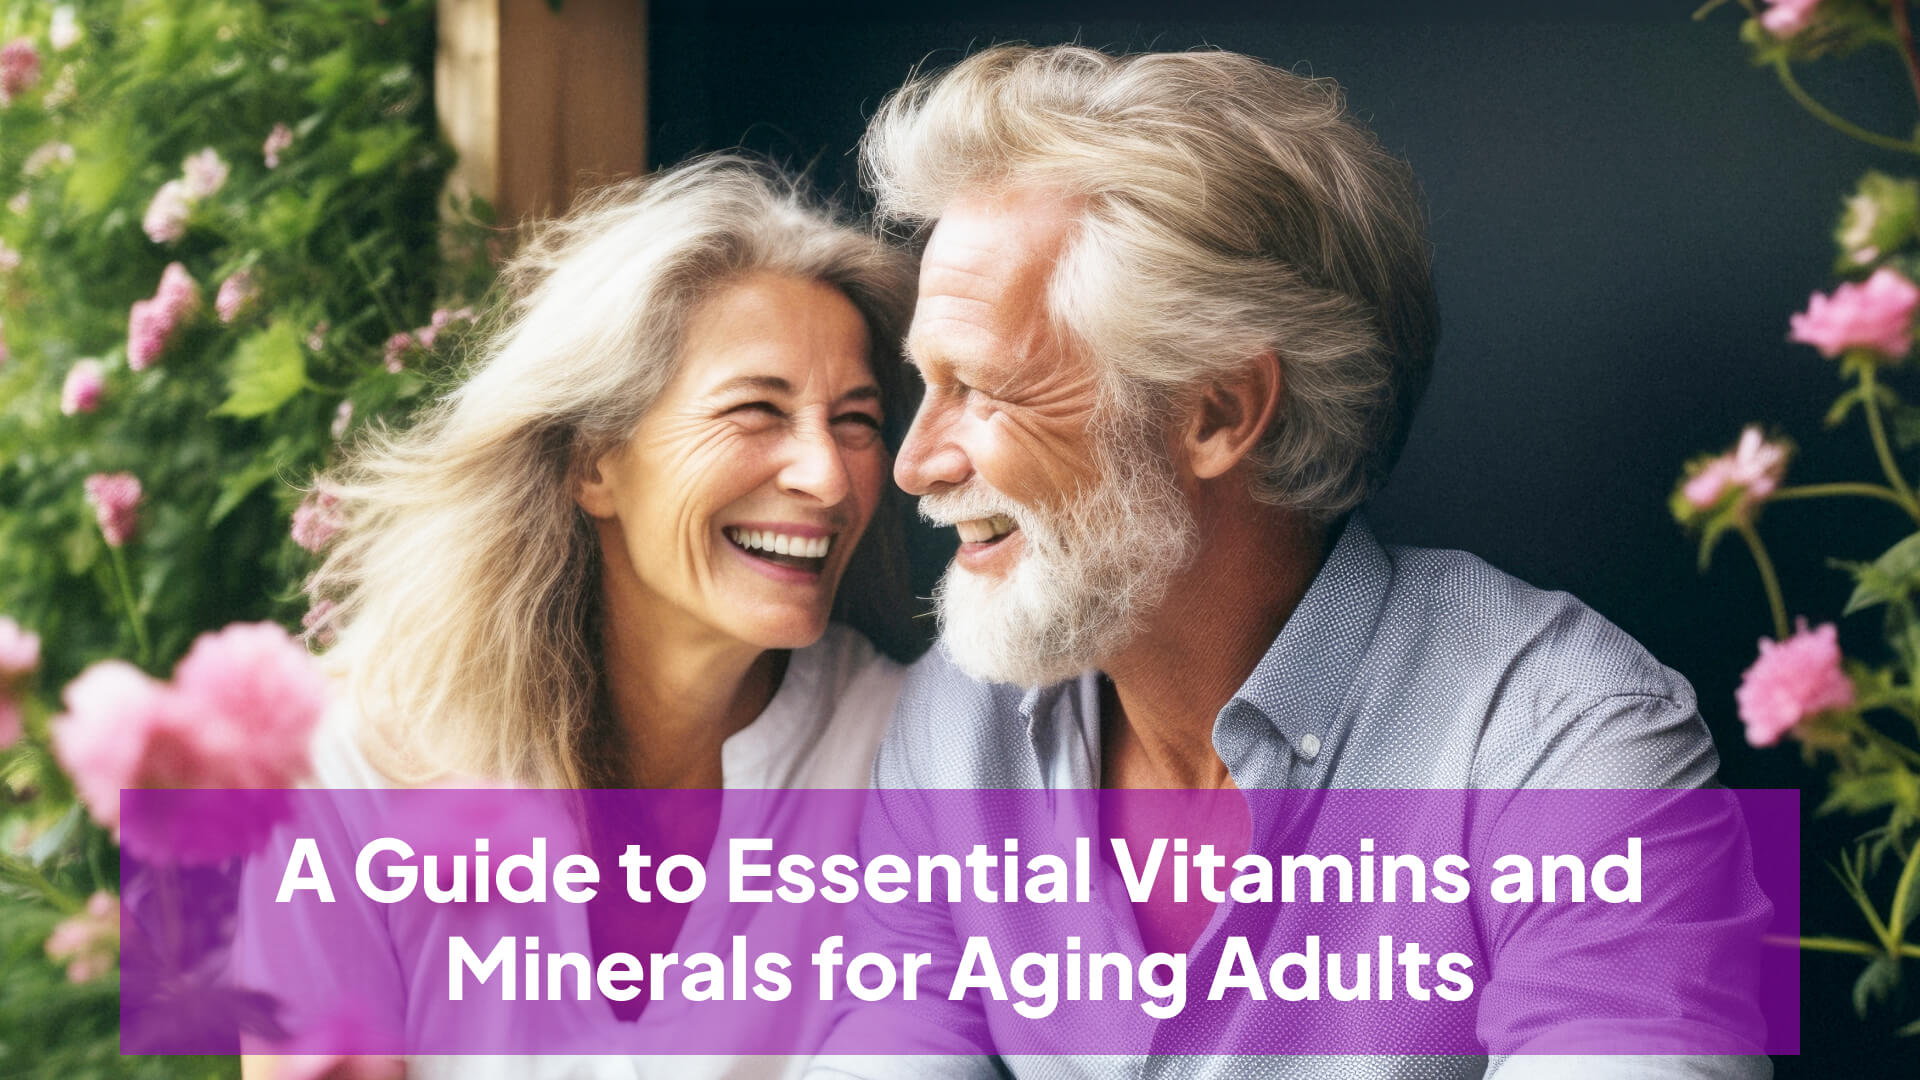 A Guide to Essential Vitamins and Minerals for Aging Adults